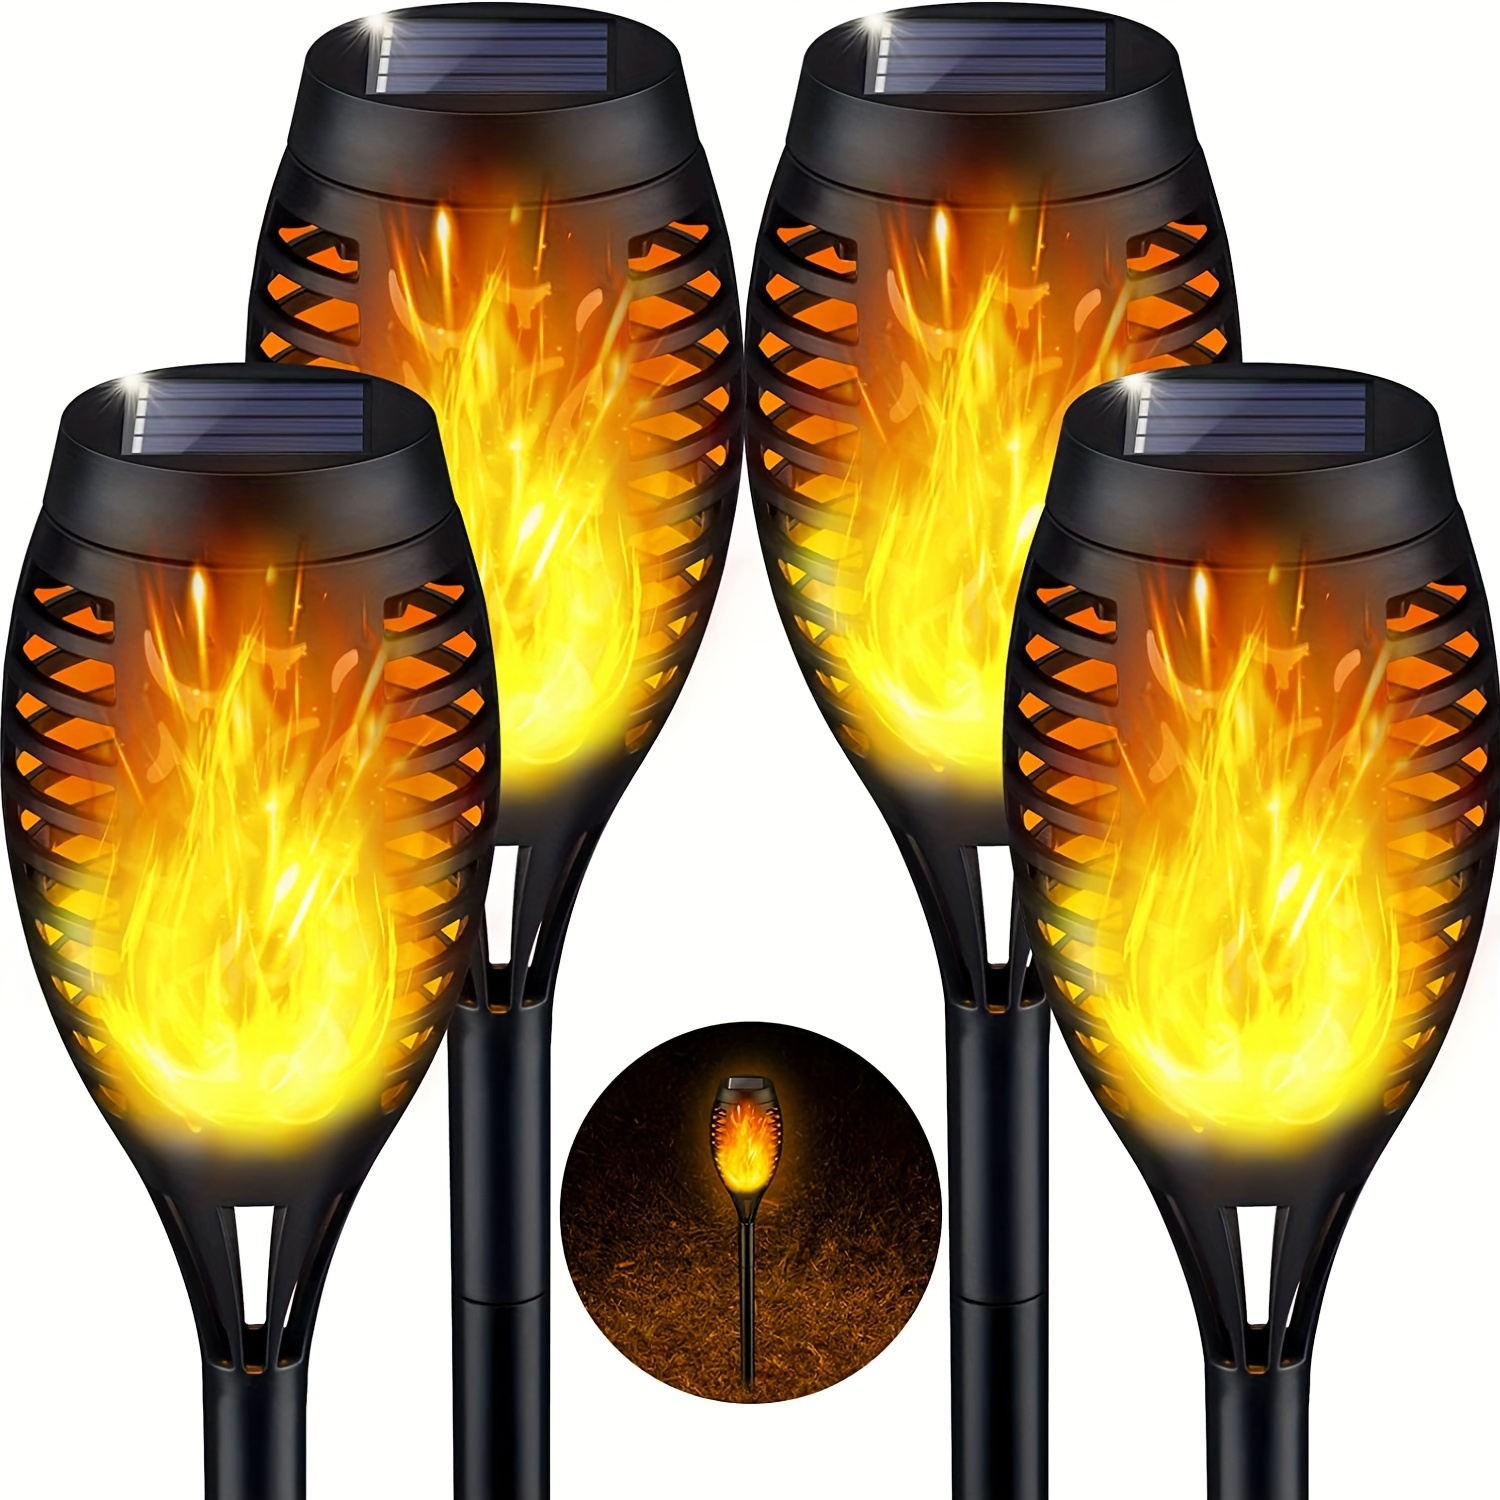 

4/8/12pcs Solar Lights, Outdoor Solar Torches Light For Garden Decor, Waterproof Decorative Led Solar Lights For Outside Pathway Patio Yard Decor Landscape Christmas & Halloween Decorations